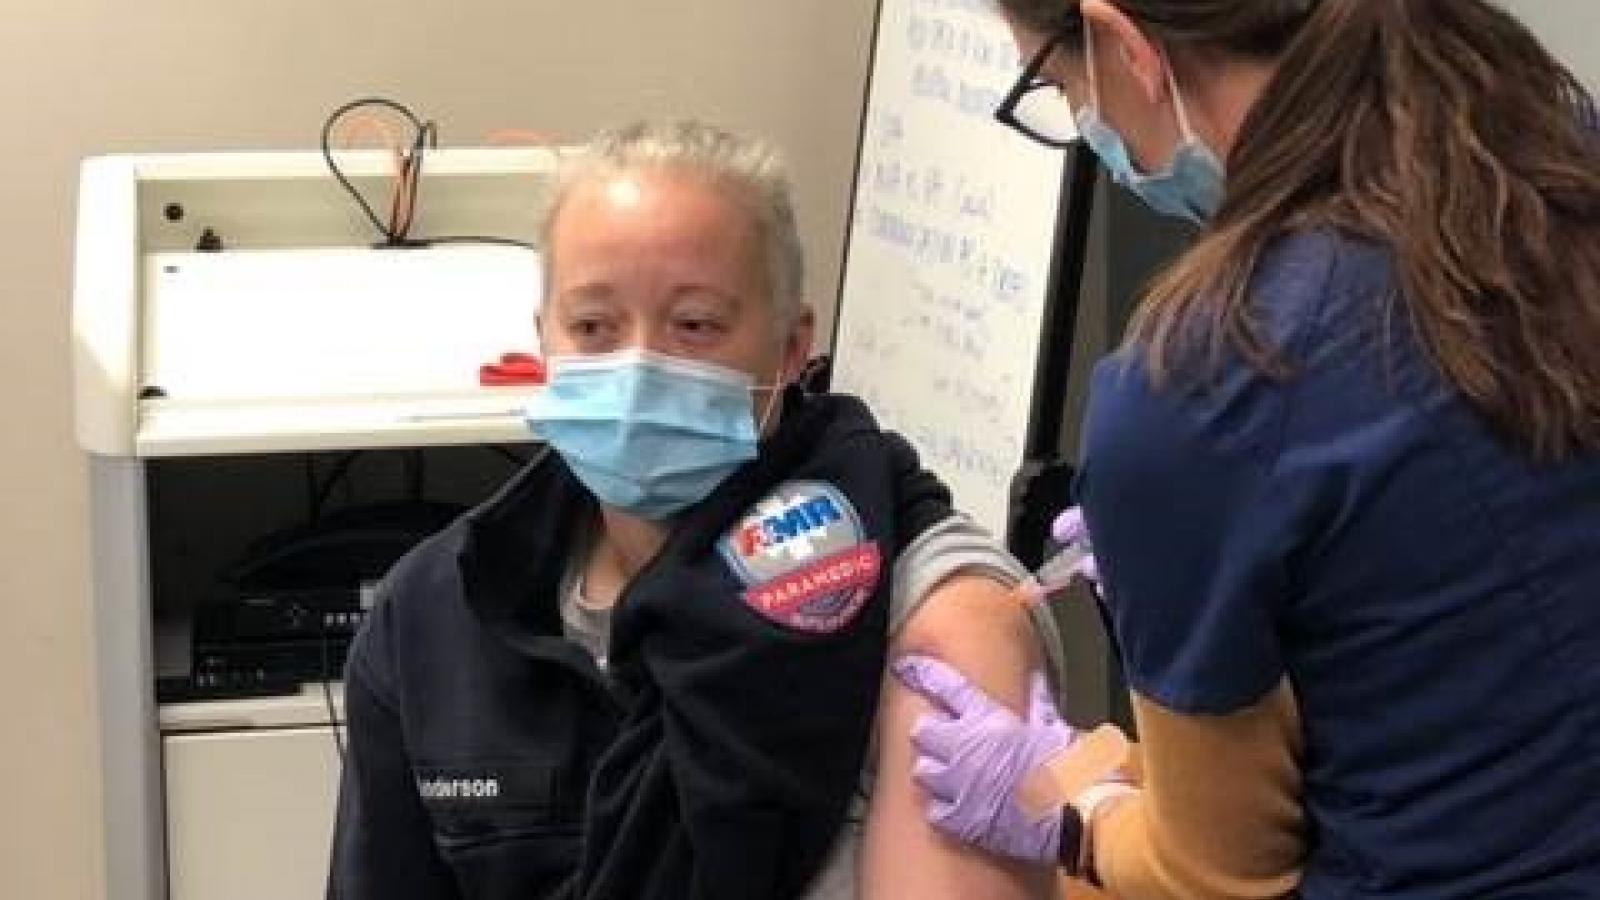 Guthrie Partners with Community Agencies for Next Round of COVID Vaccinations